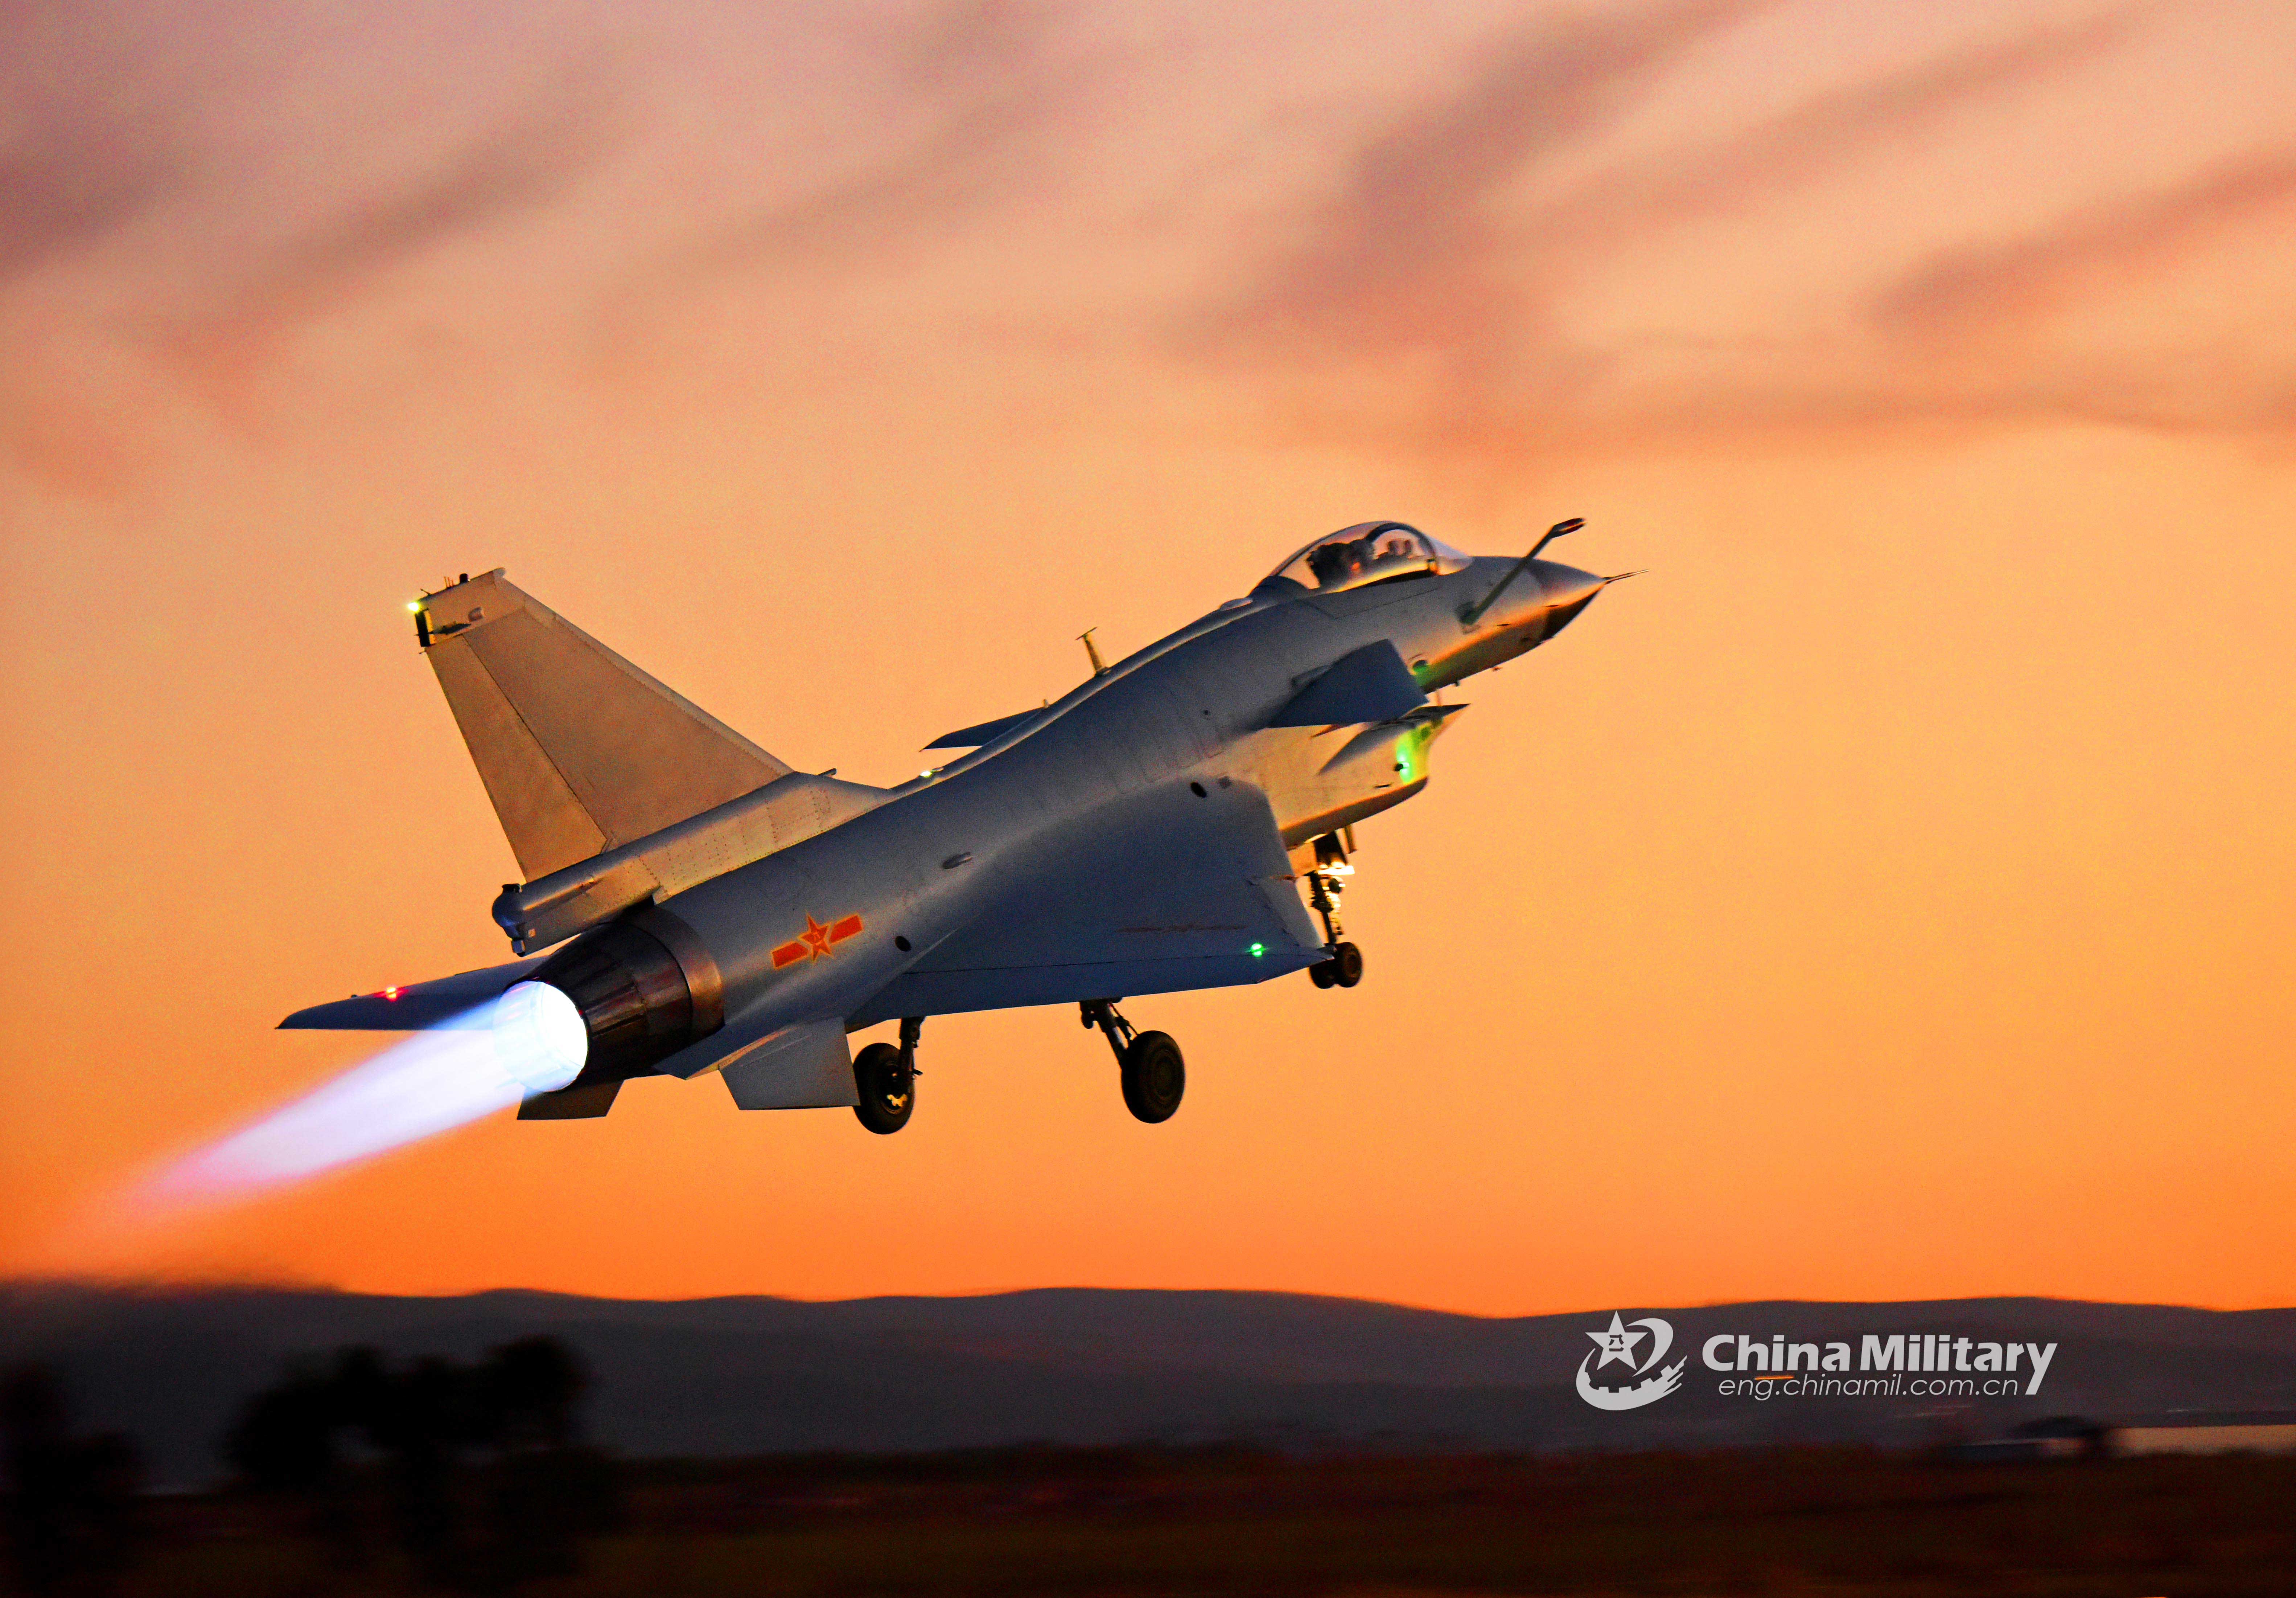 J-10 fighter jets take off for night training - China Military